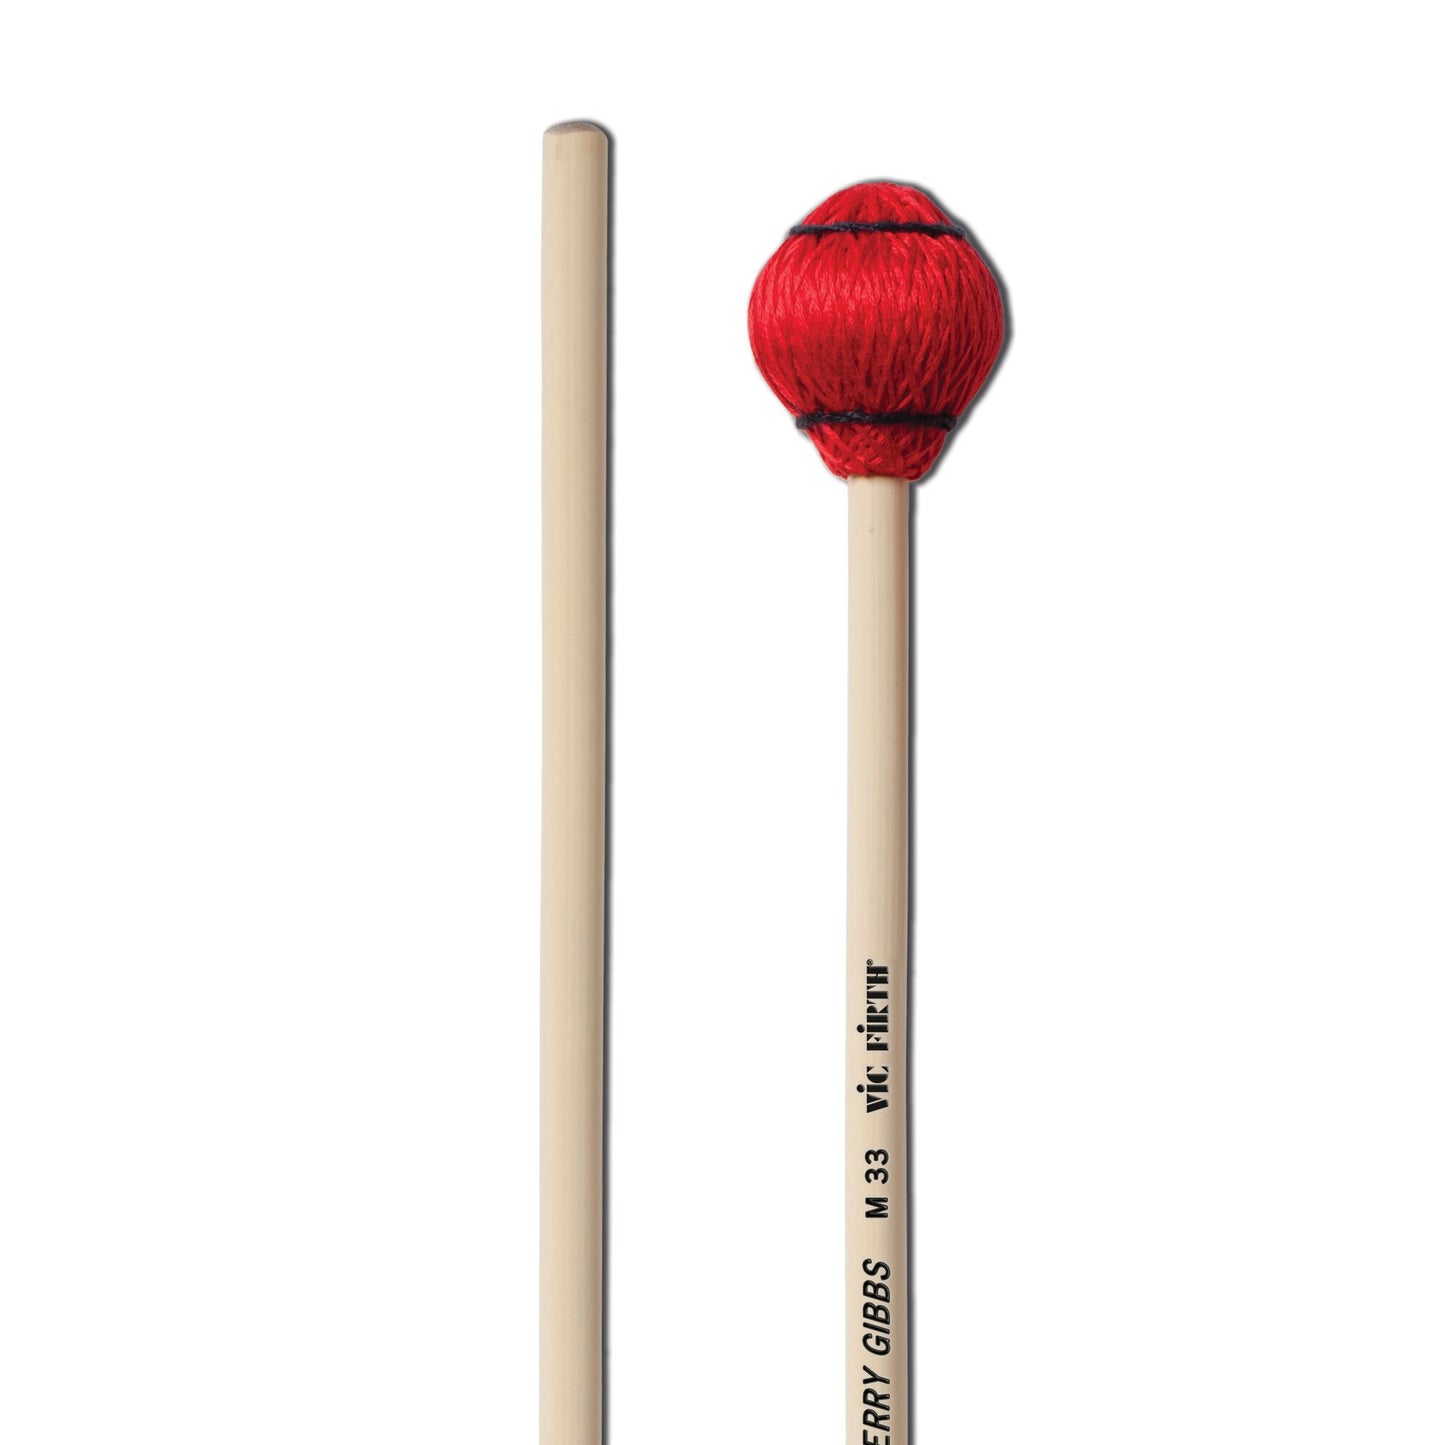 M33 - Terry Gibbs Keyboard - Hard, Red Cord Mallets